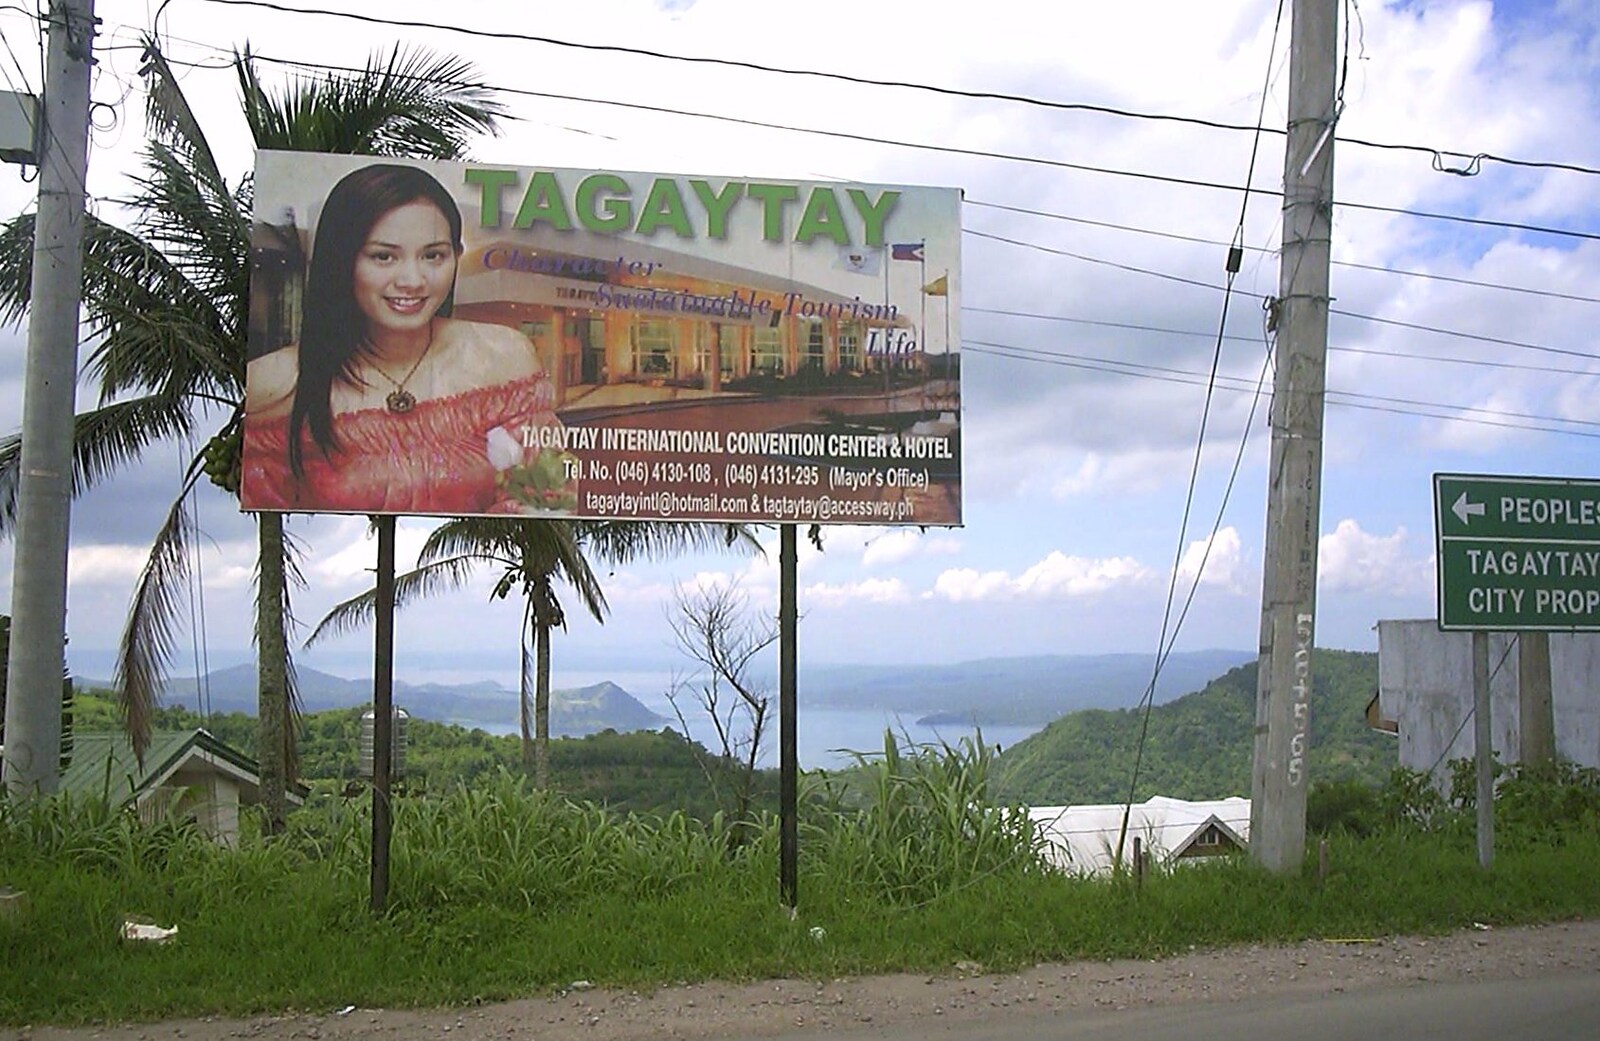 A big sign for Tagaytay from A Postcard From Manila: a Working Trip, Philippines - 9th July 2004